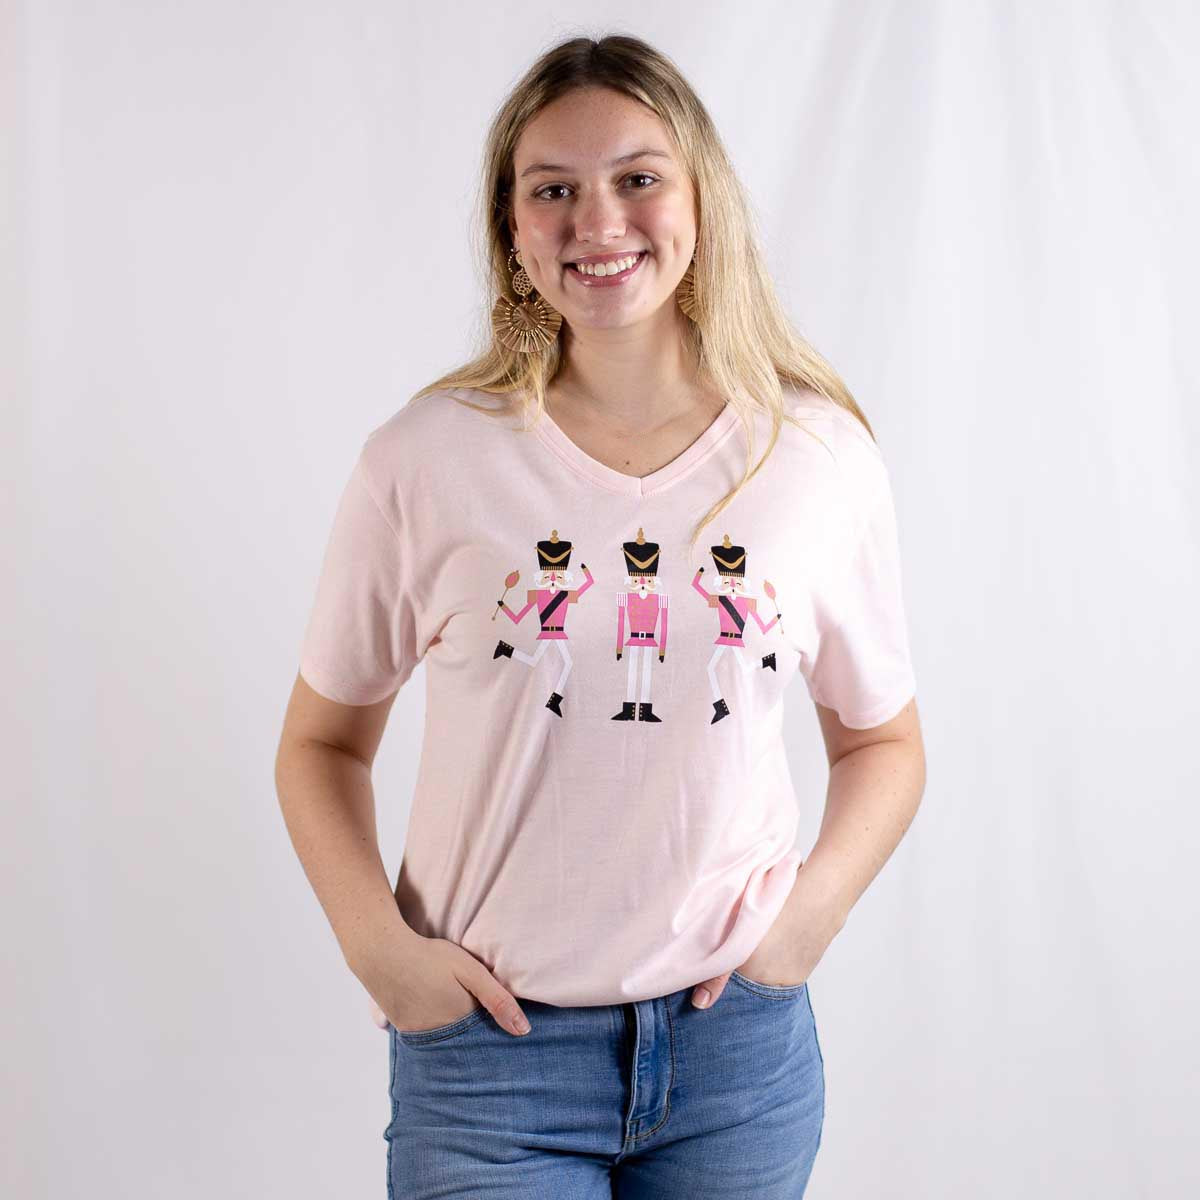 Soft and sweet, our crew neck sleep tees are adorable and comfortable. Perfect for matching pajamas or denim, you'll spread joy everywhere you go!  Machine wash cold. Tumble dry. 